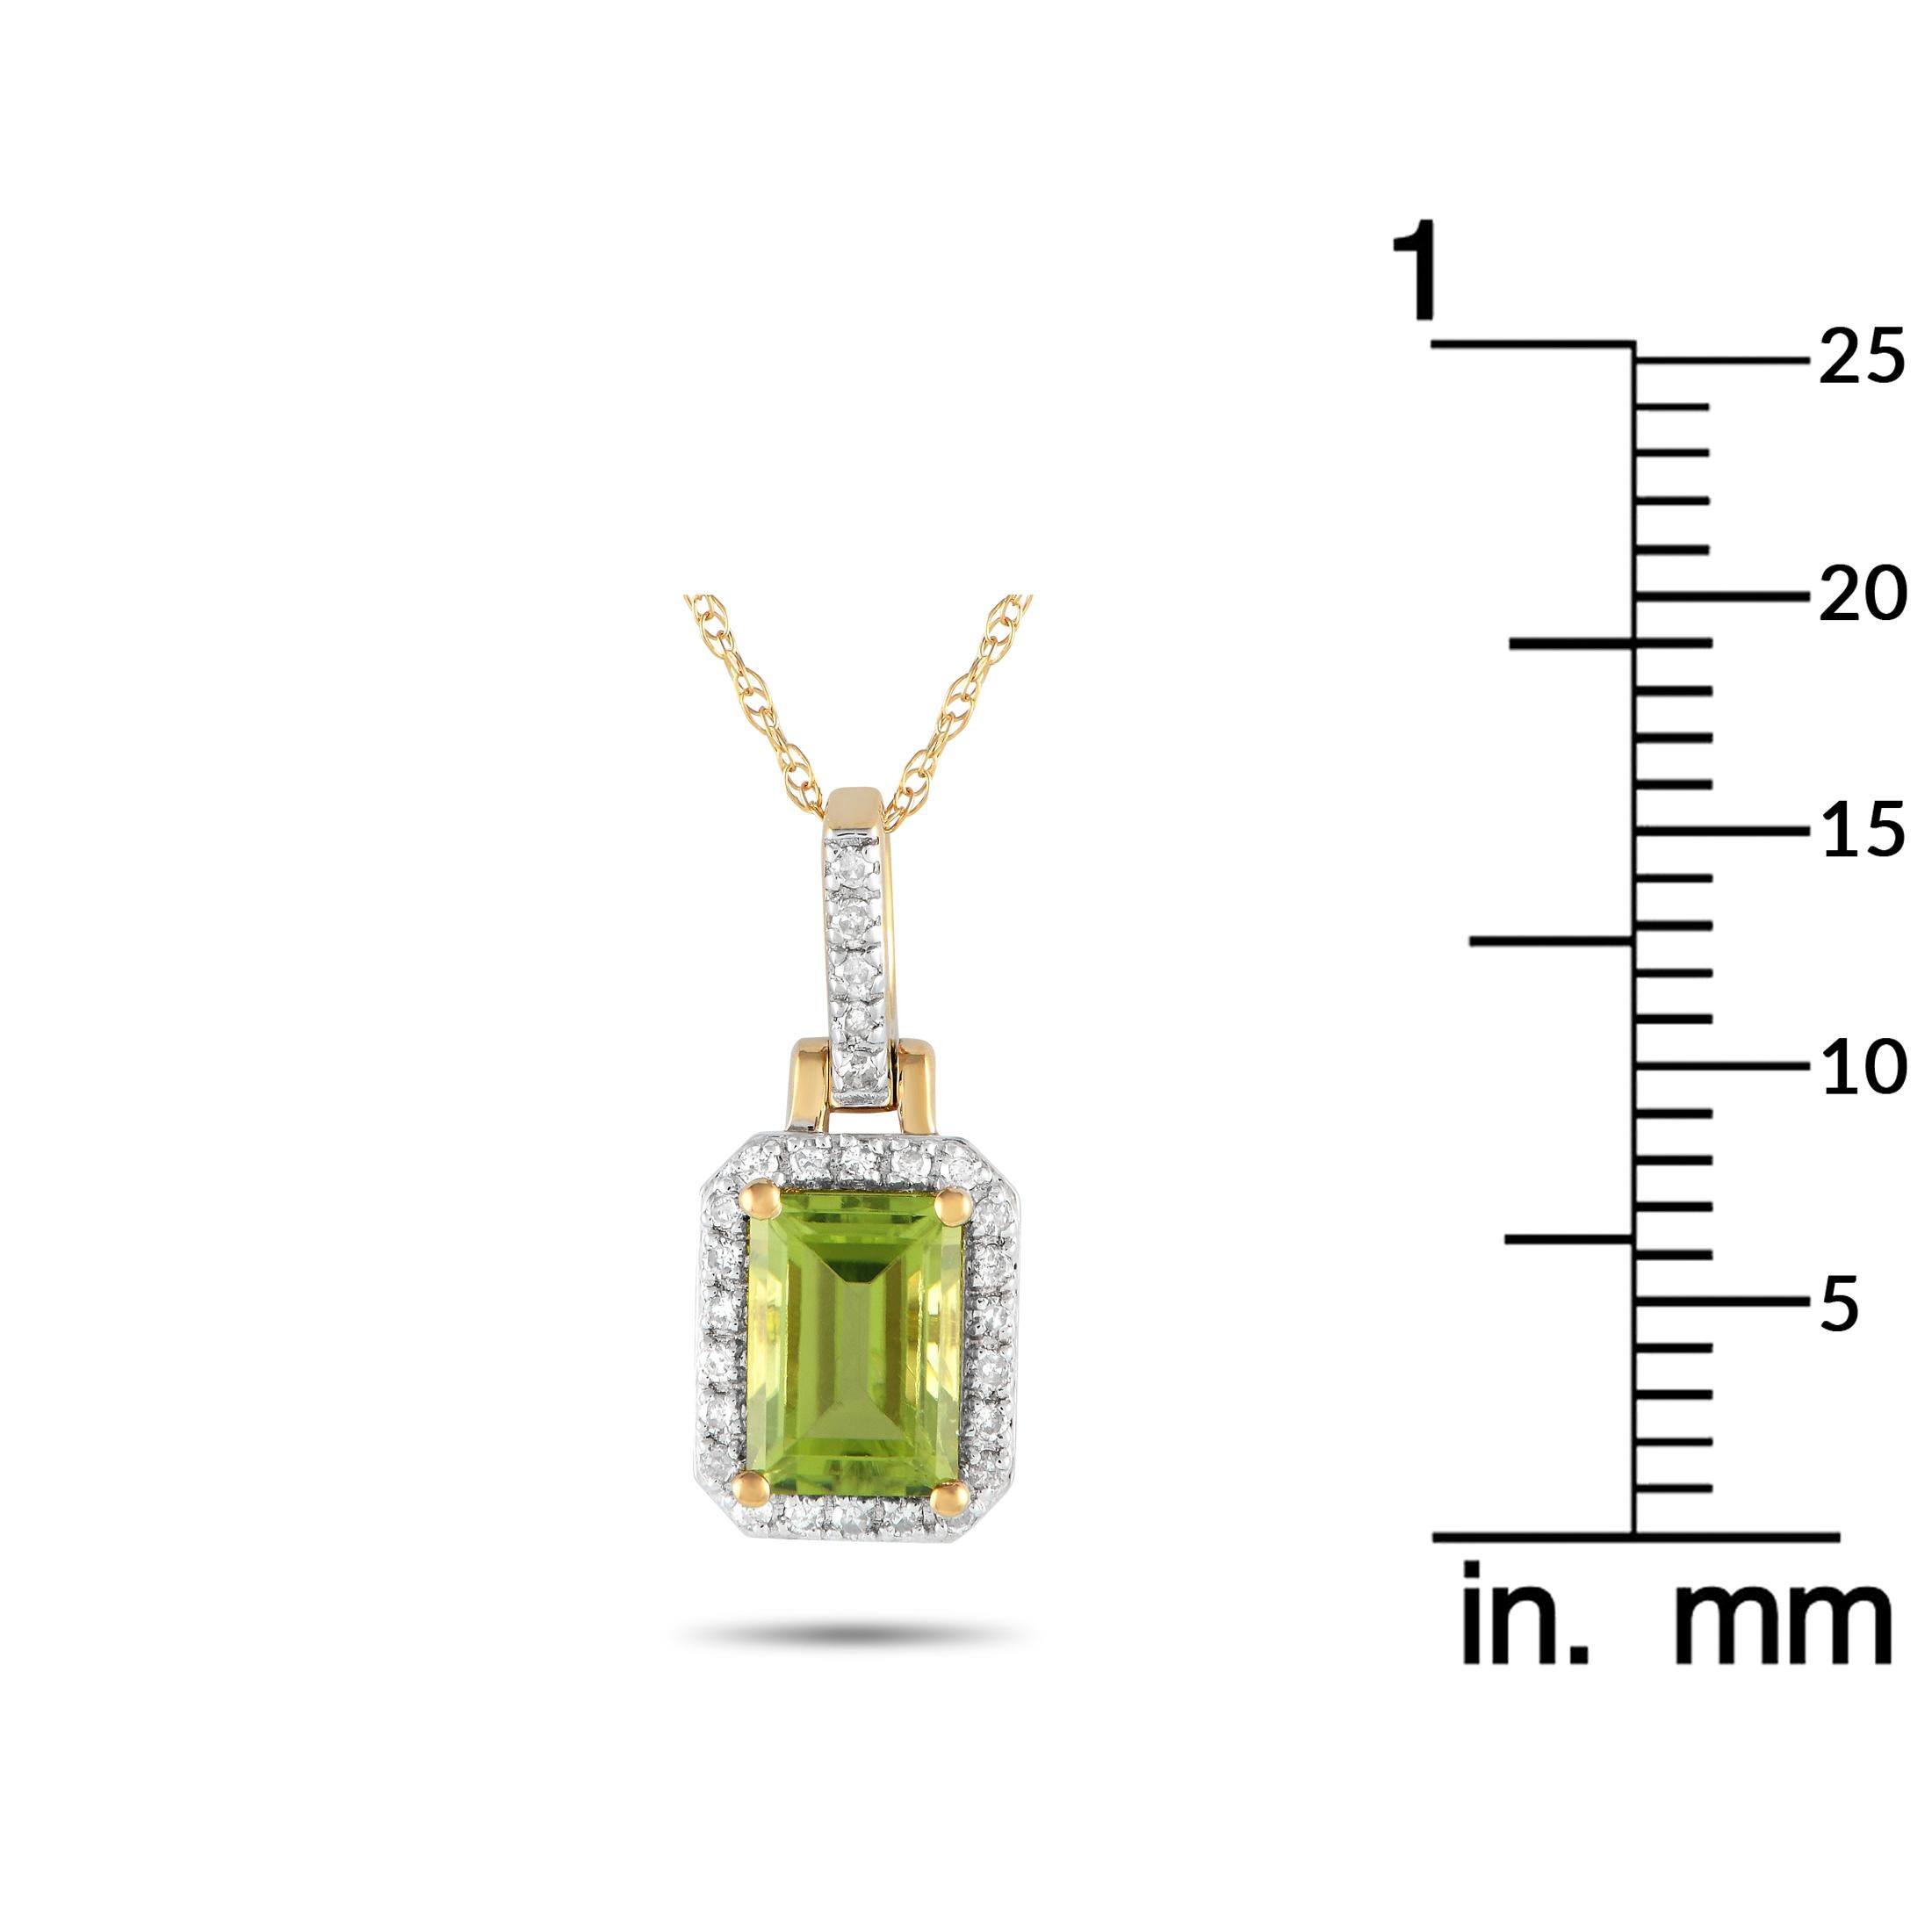 LB Exclusive 14K Yellow Gold 0.12ct Diamond Pendant Necklace PD4-15501YPE In New Condition For Sale In Southampton, PA